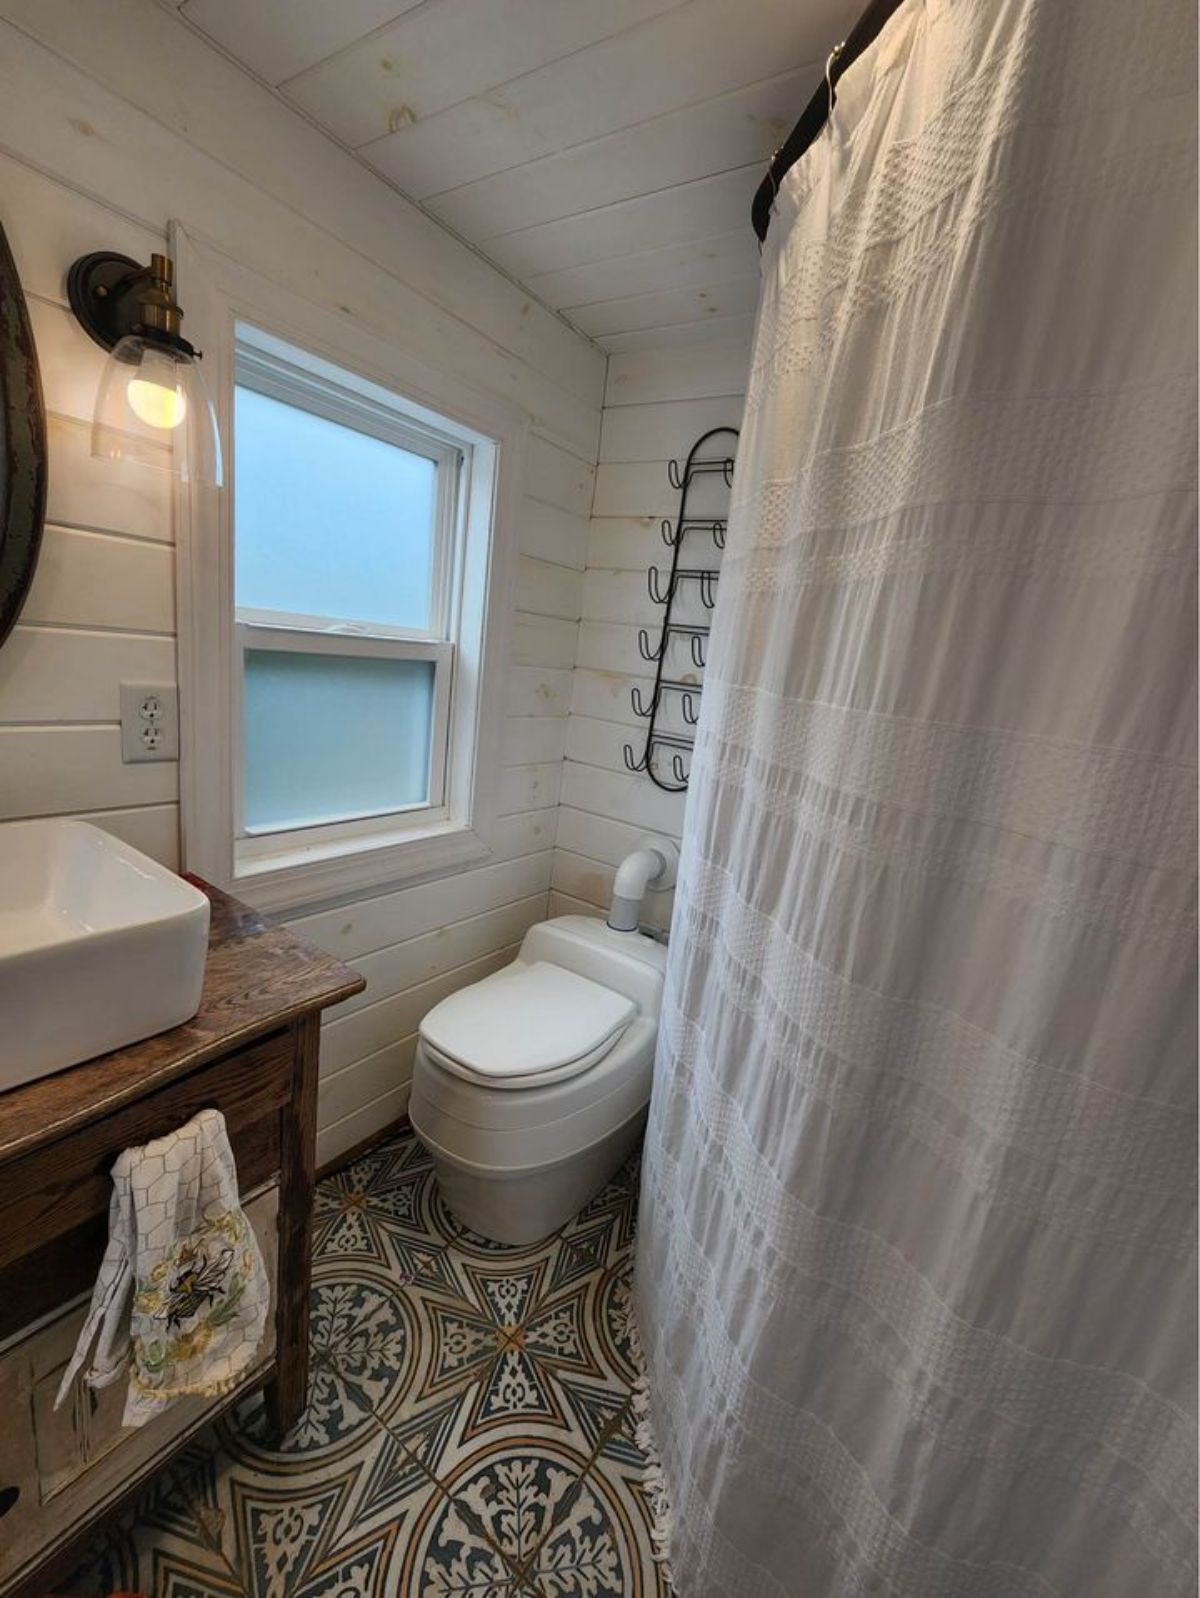 Bathroom of 450 sf Tiny Home has a standard toilet, sink with vanity and separate shower area